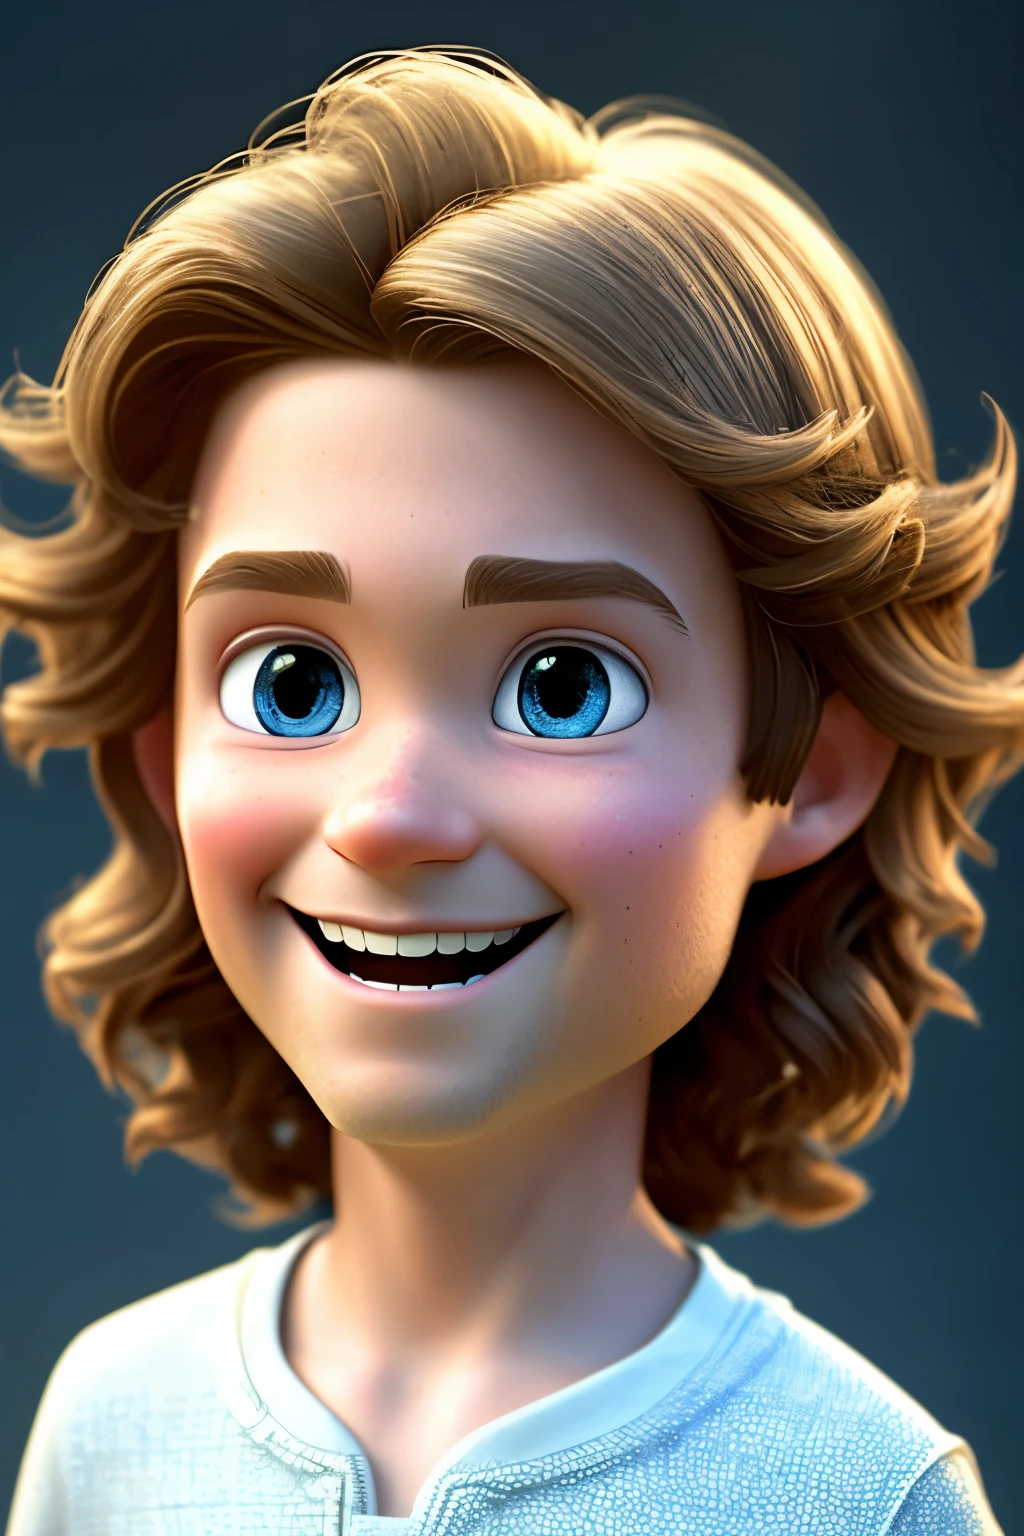 A joyful depiction of Jesus Christ as a boy with an animated, standing-on-end hairdo, set against a pristine white background, Tom-like charm, Pixar-style animation, high-definition 3D rendering, intricately detailed face, and asymmetric composition, 16k resolution.